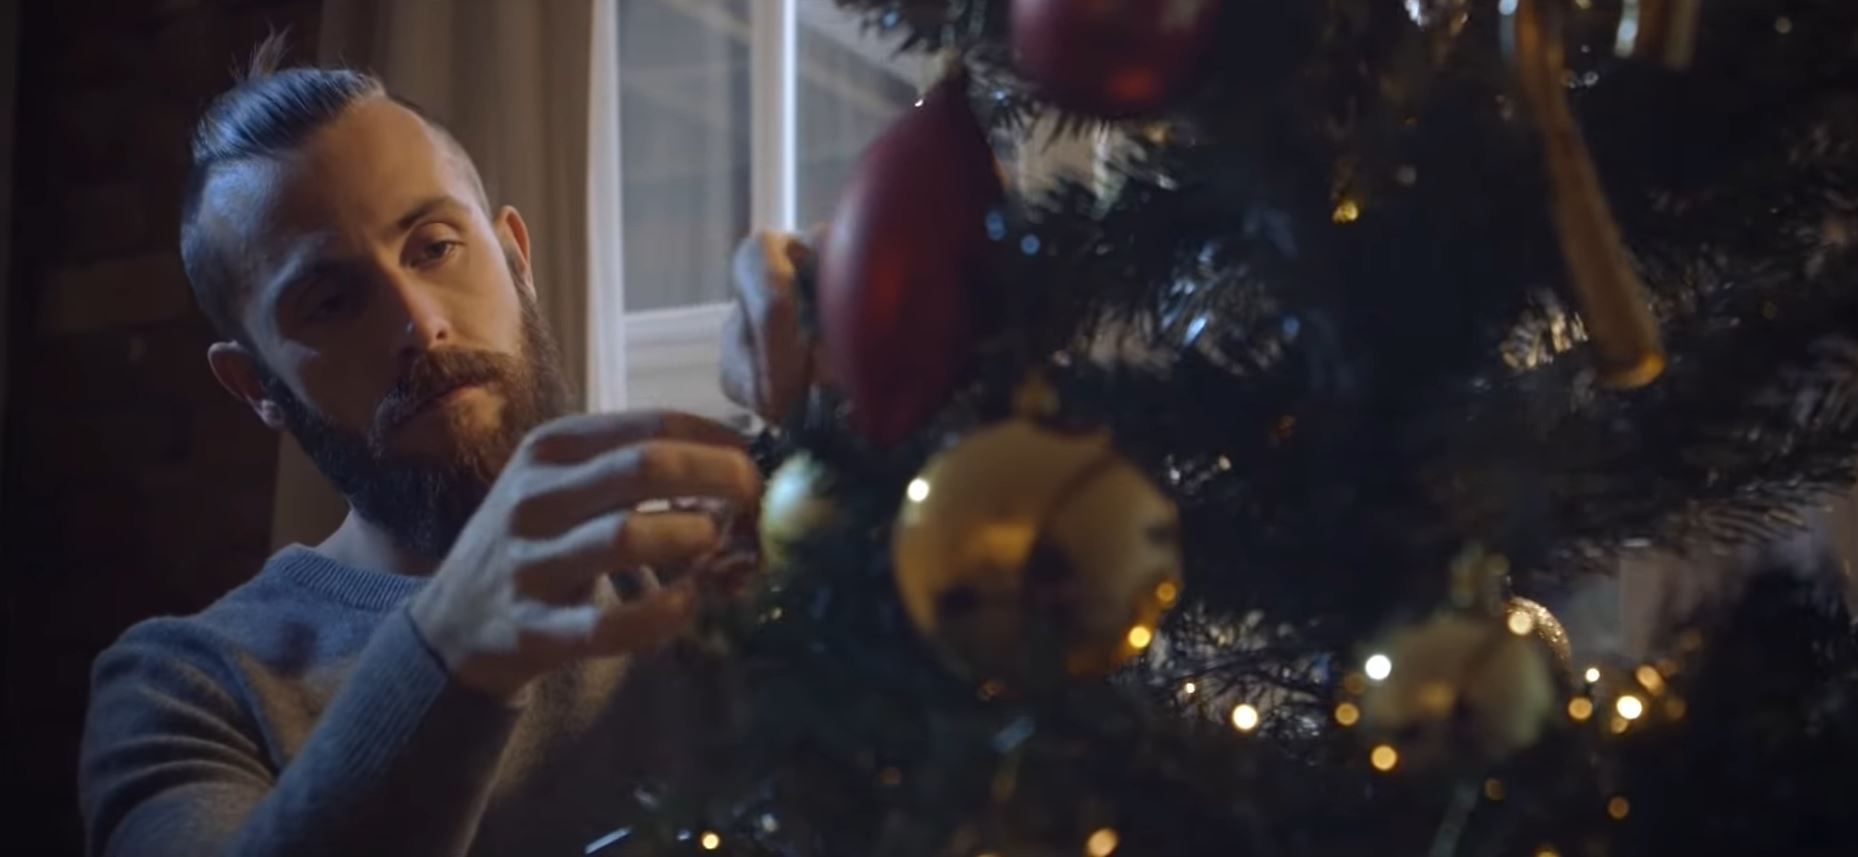 Love is a Gift Christmas ad